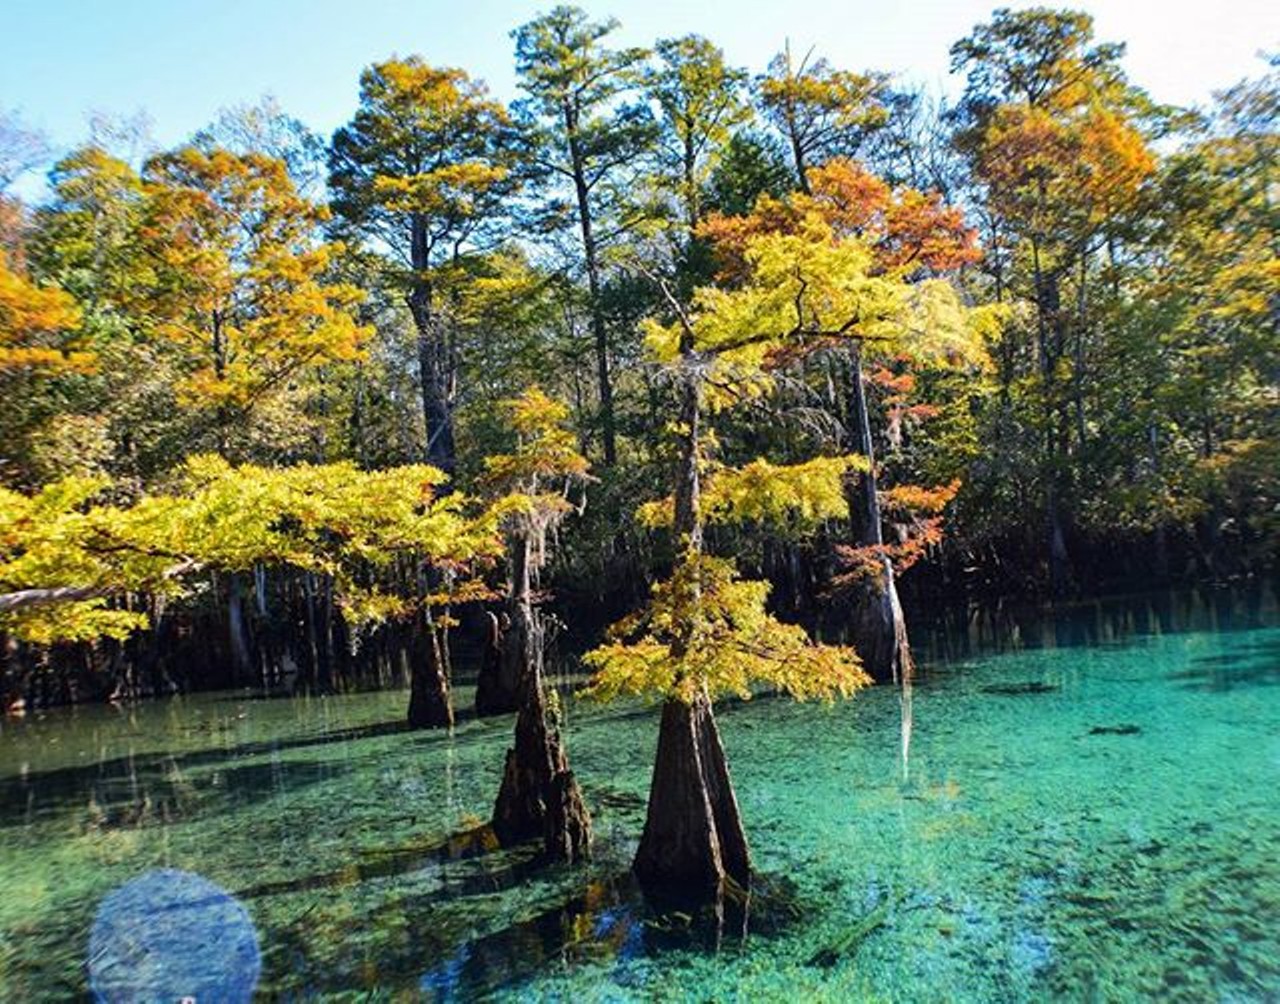 Morrison Springs 
Morrison Springs Road, Caryville, FL 32427
Estimated travel time: 5 hours, 10 minutes from Orlando
As one of the most popular diving spots in northwest Florida, the park&#146;s amenities don&#146;t stop there. There&#146;s a boat ramp downstream to avoid conflicts between divers and swimmers in the spring.
Photo via _rhii_harrison/Instagram